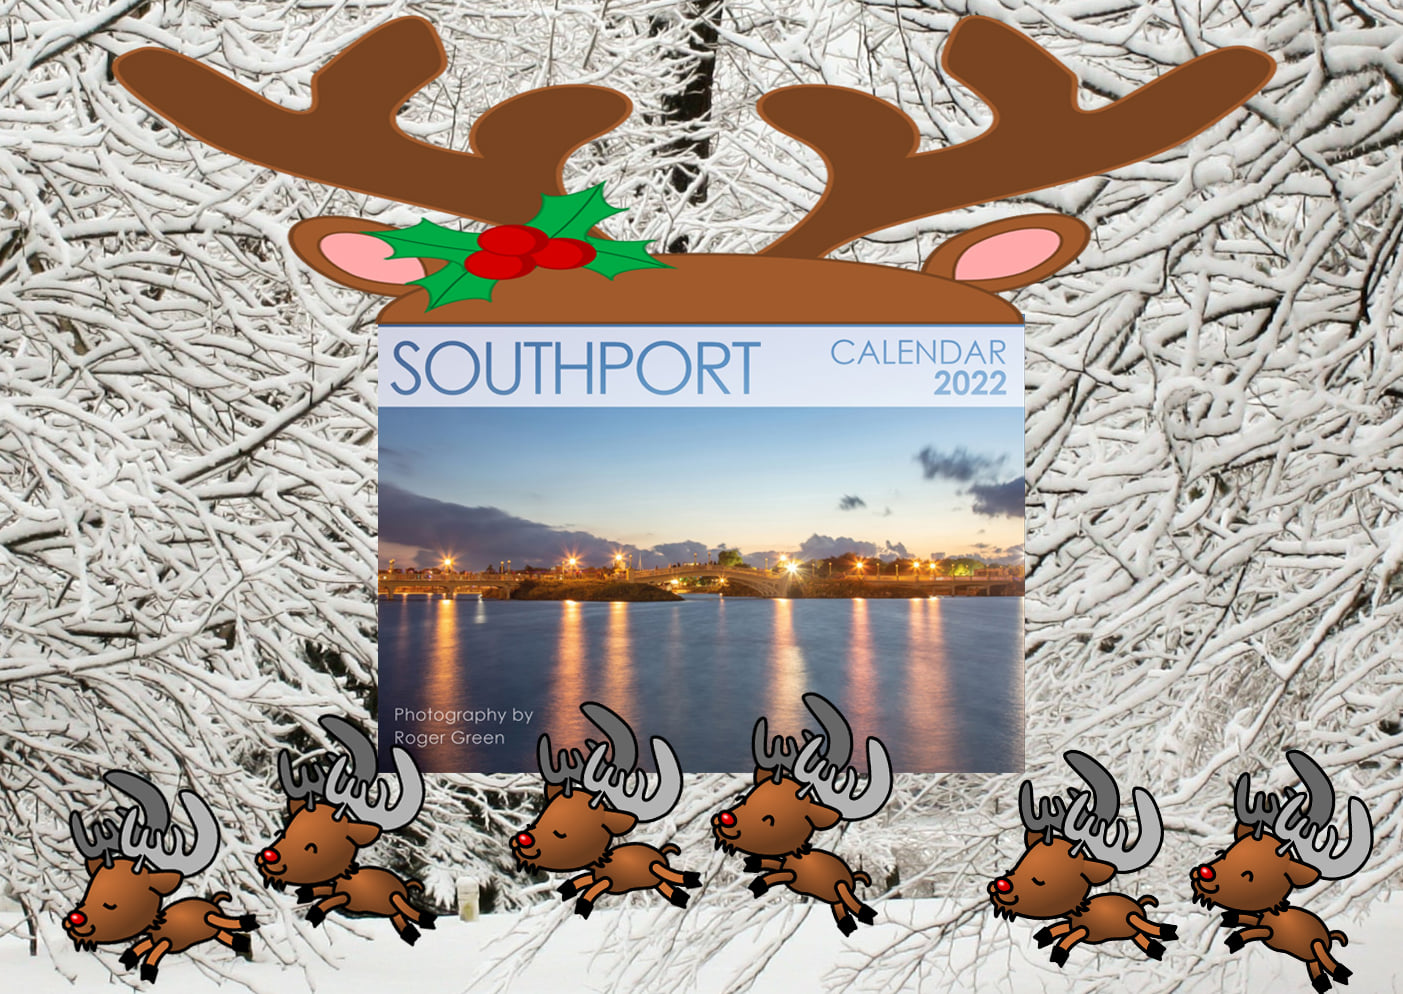 The Southport Calendar 2022 by Roger Green 